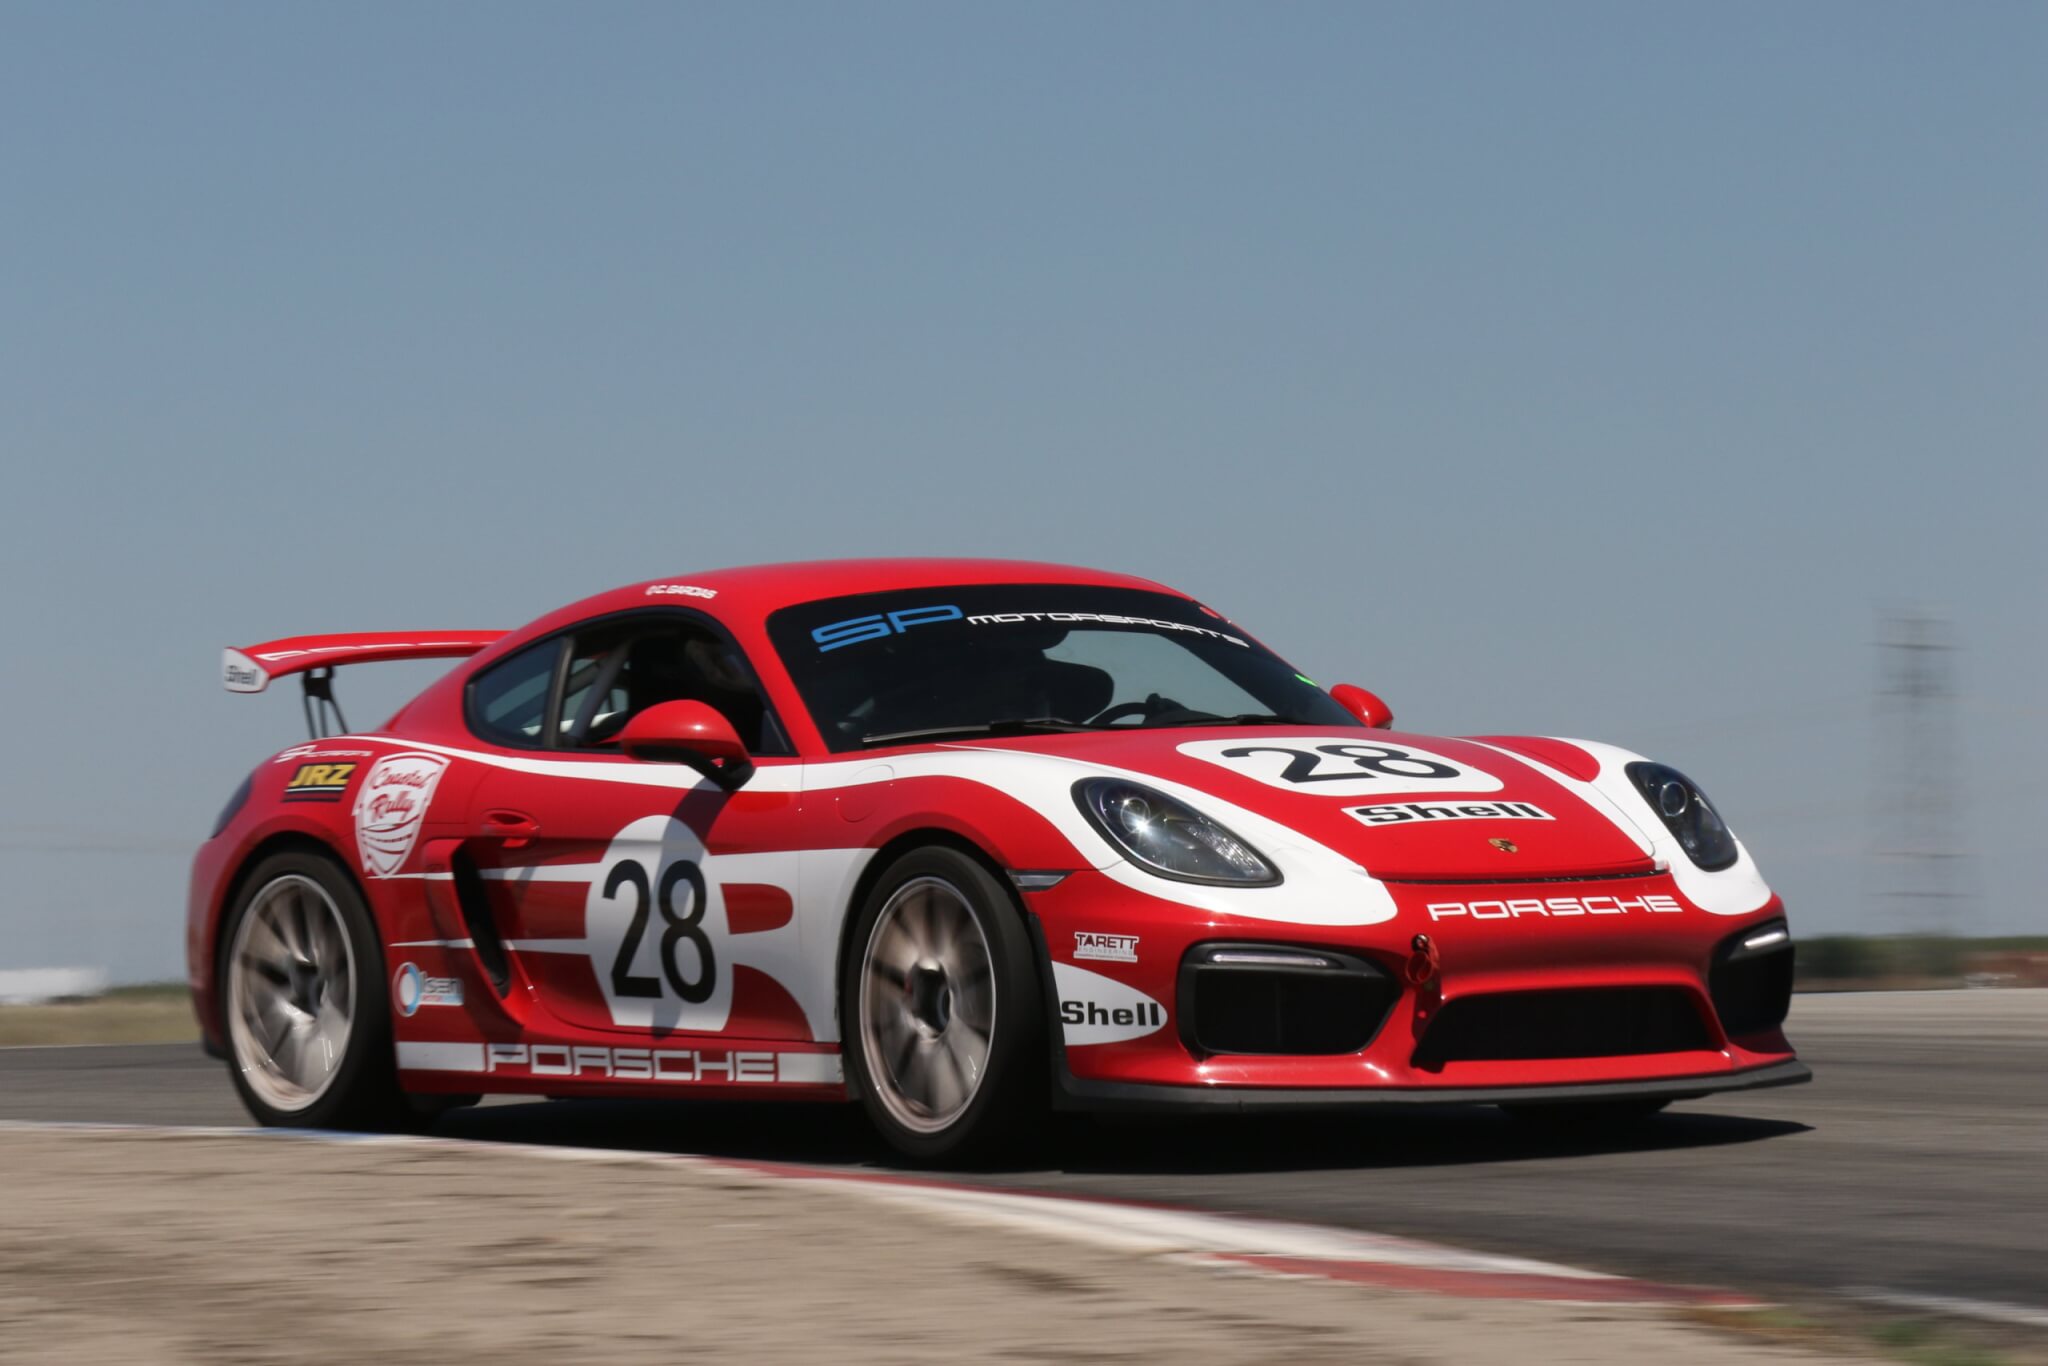 #28 SP Motorsports GT4 cornering a turn at Buttonwillow Raceway